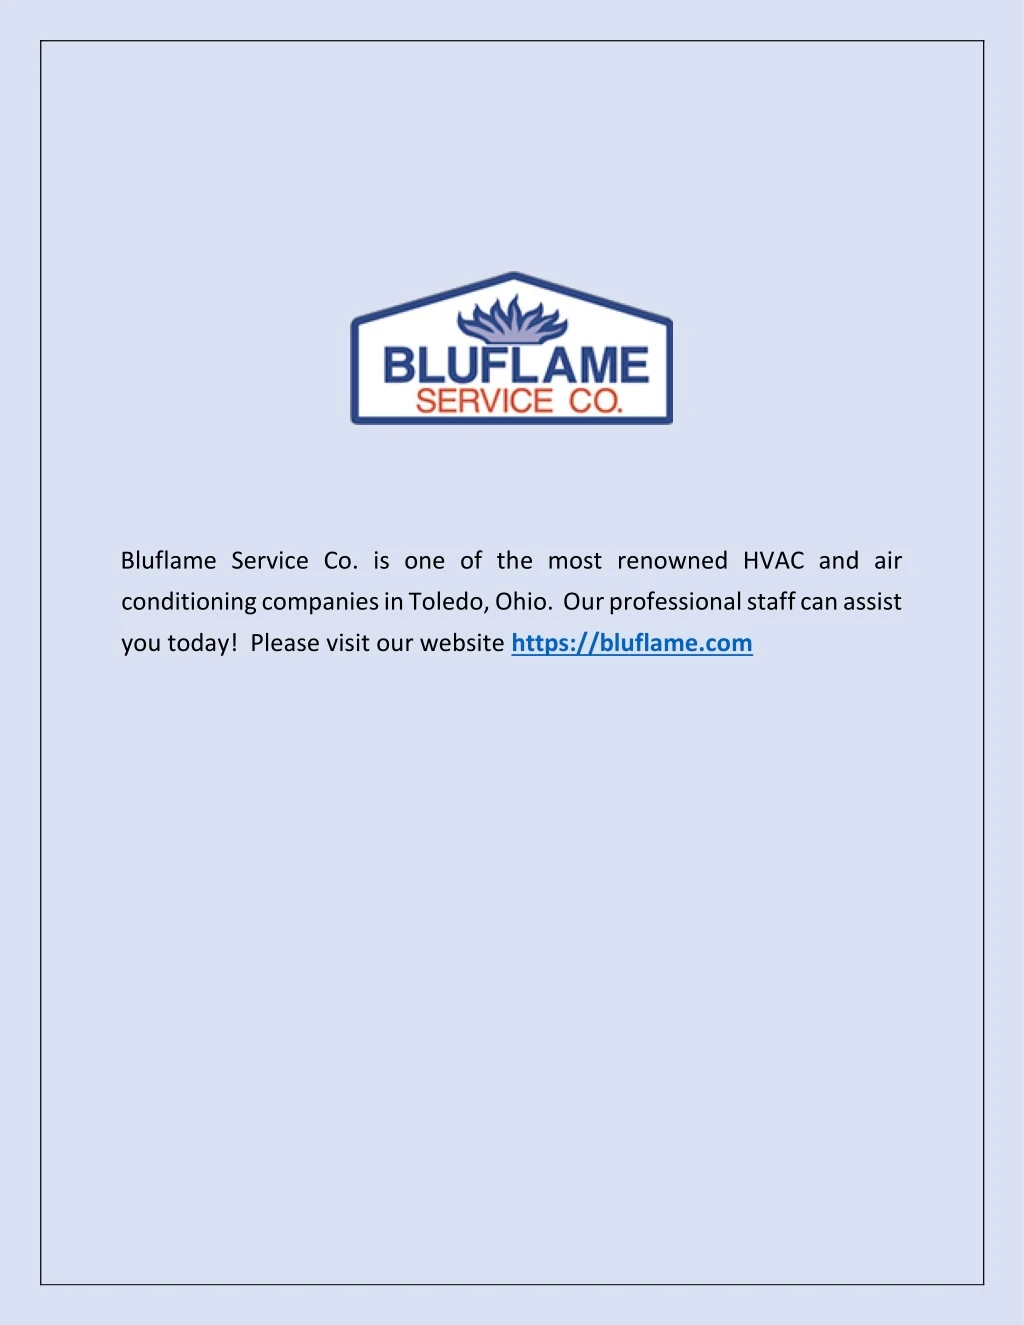 bluflame service co is one of the most renowned